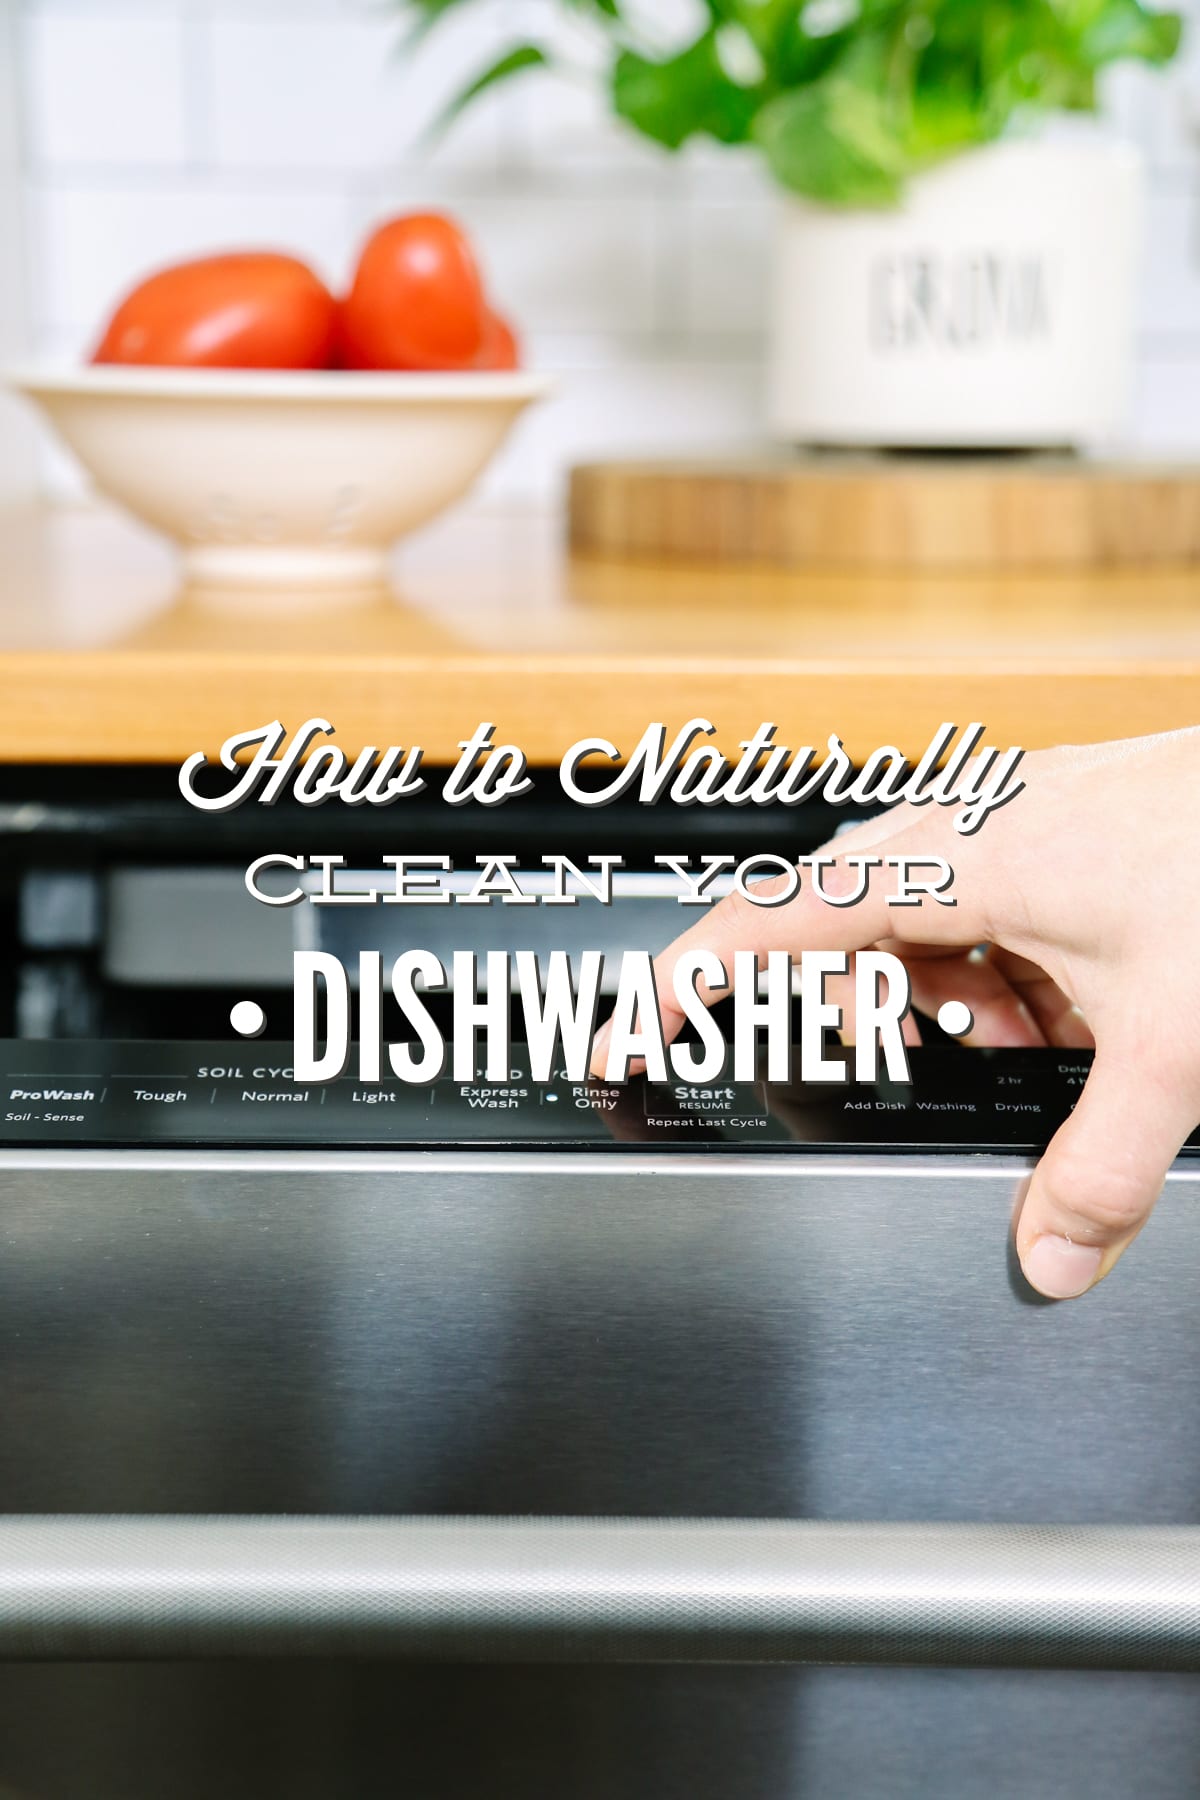 how to naturally clean your dishwasher - live simply